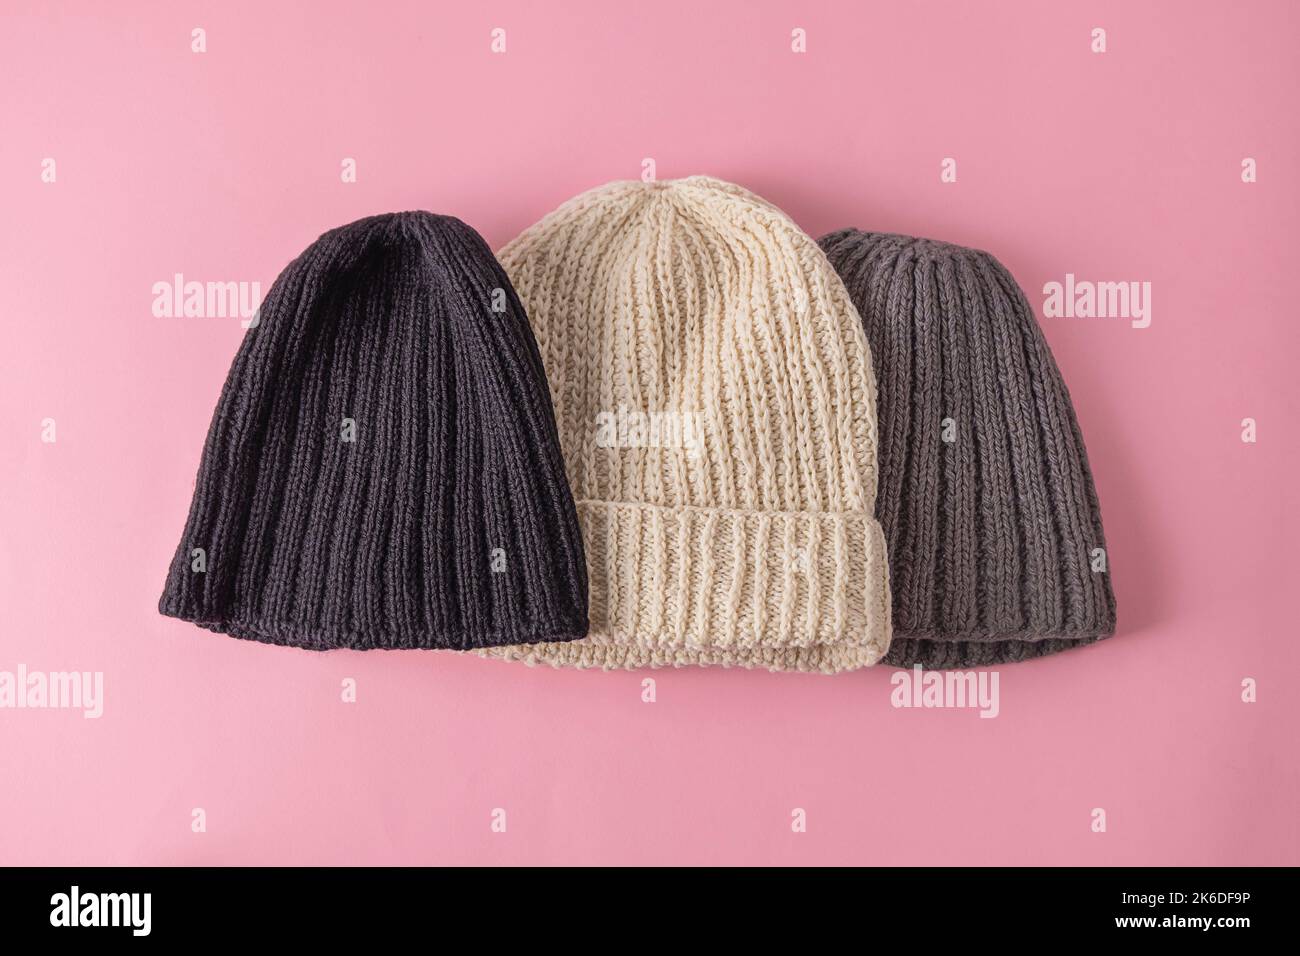 Top view of wool knitted hats on soft pink background. Handmade knitted clothes, winter close concept Stock Photo